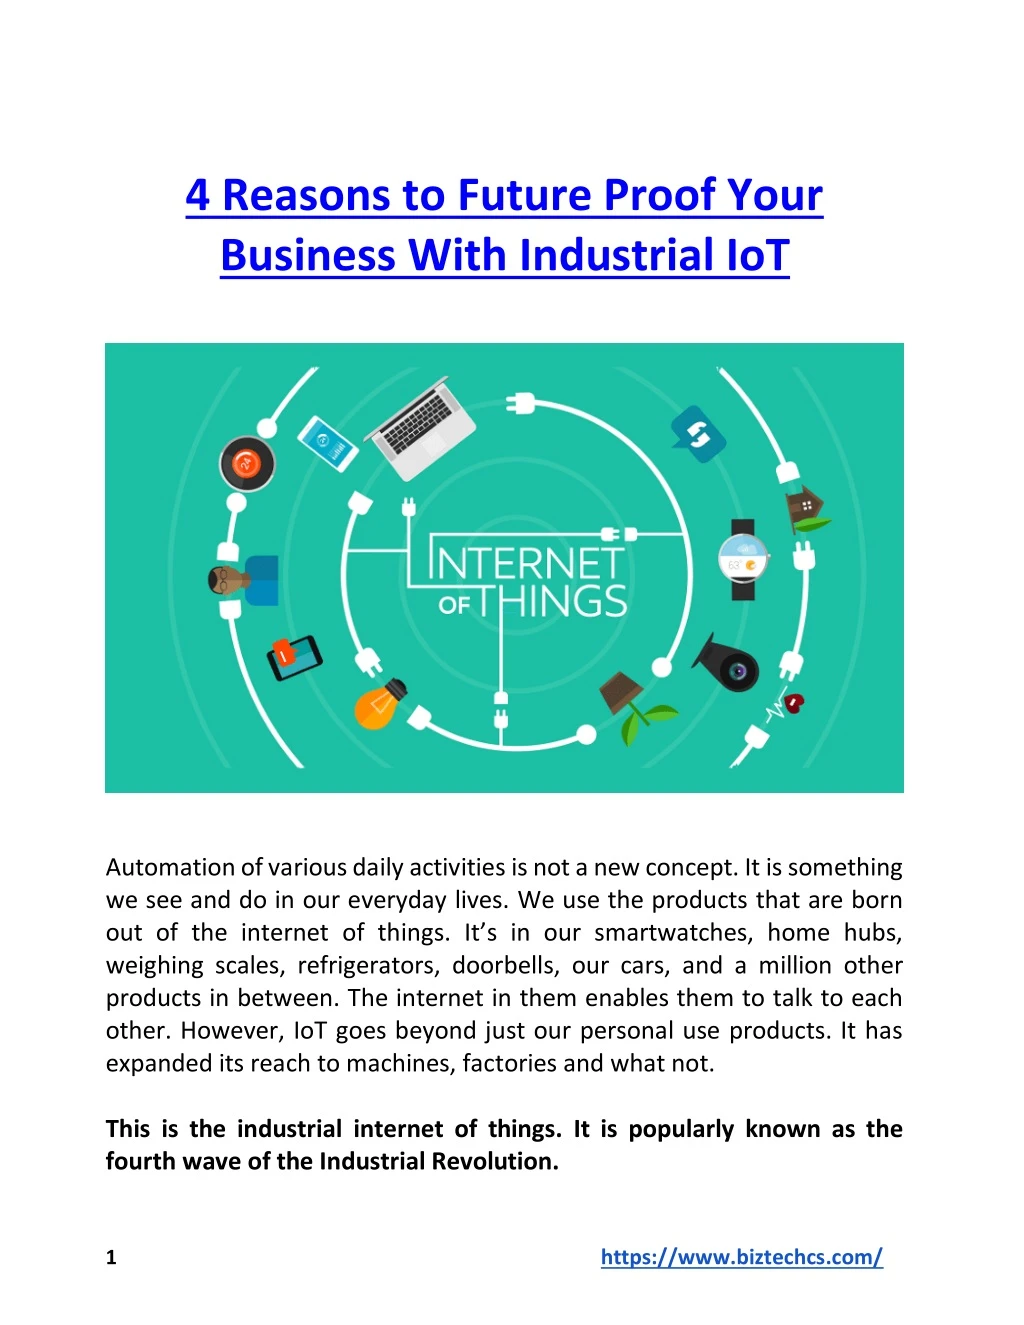 4 reasons to future proof your business with